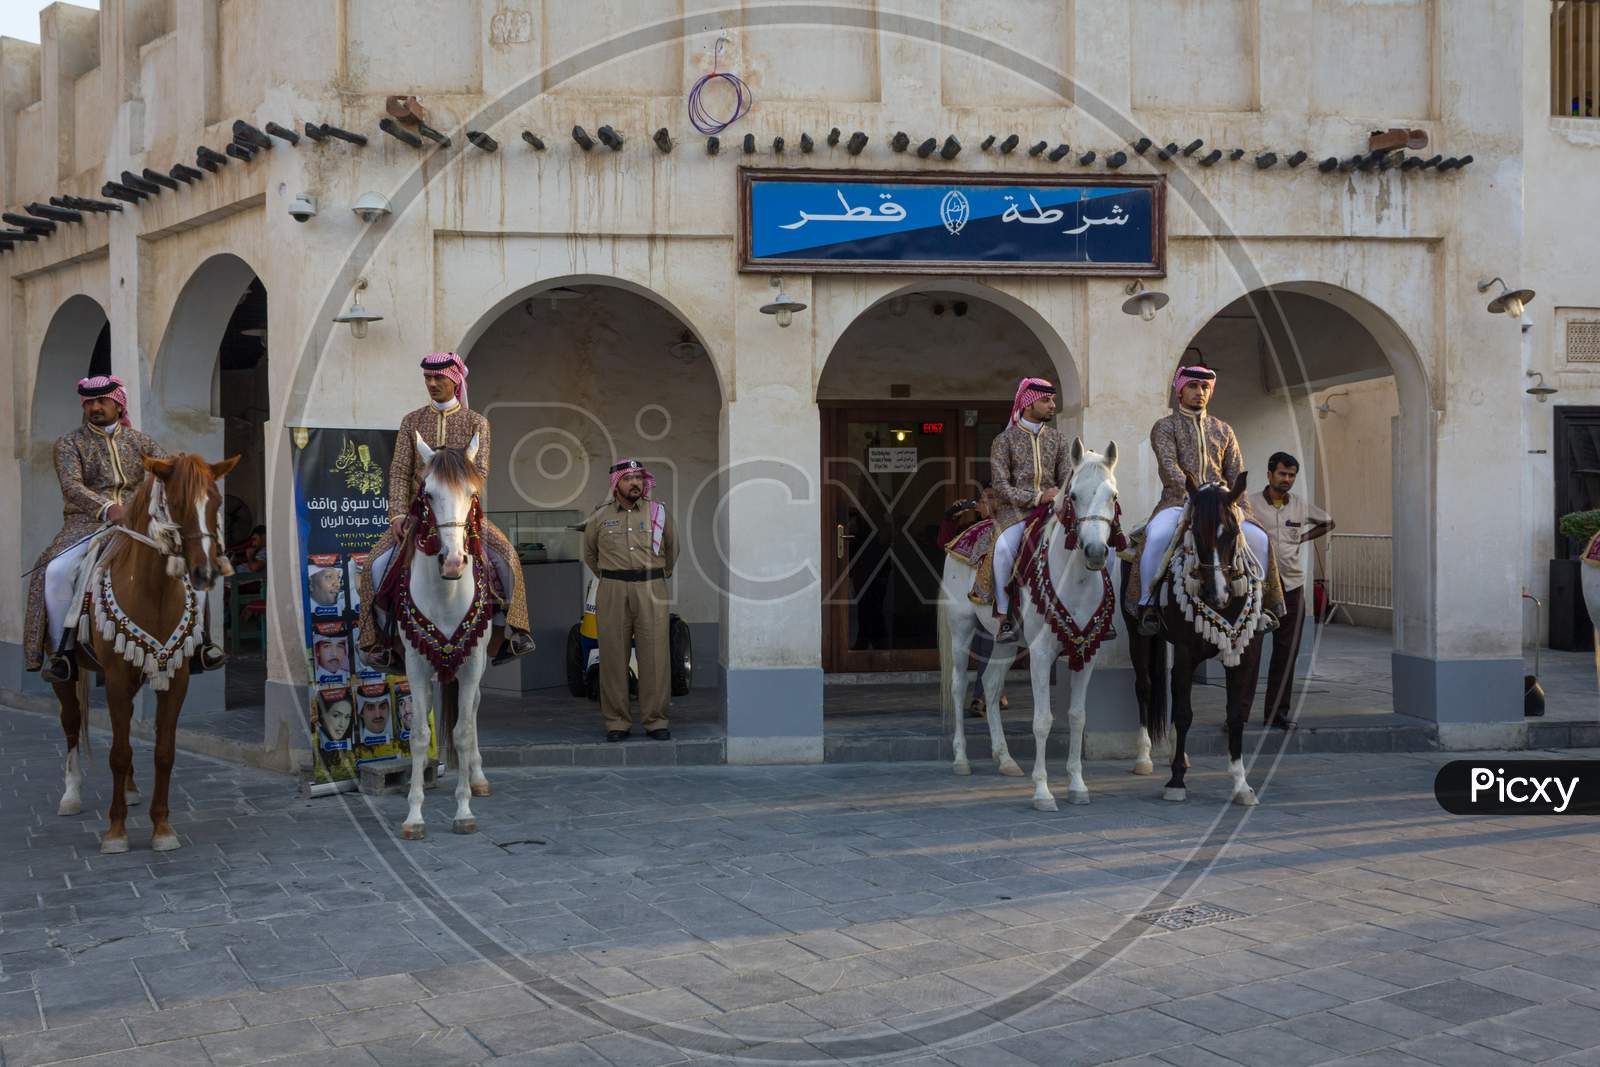 Old police station in Souk Waqif Doha Qatar daylight view with traditional guards riding horses in front of it